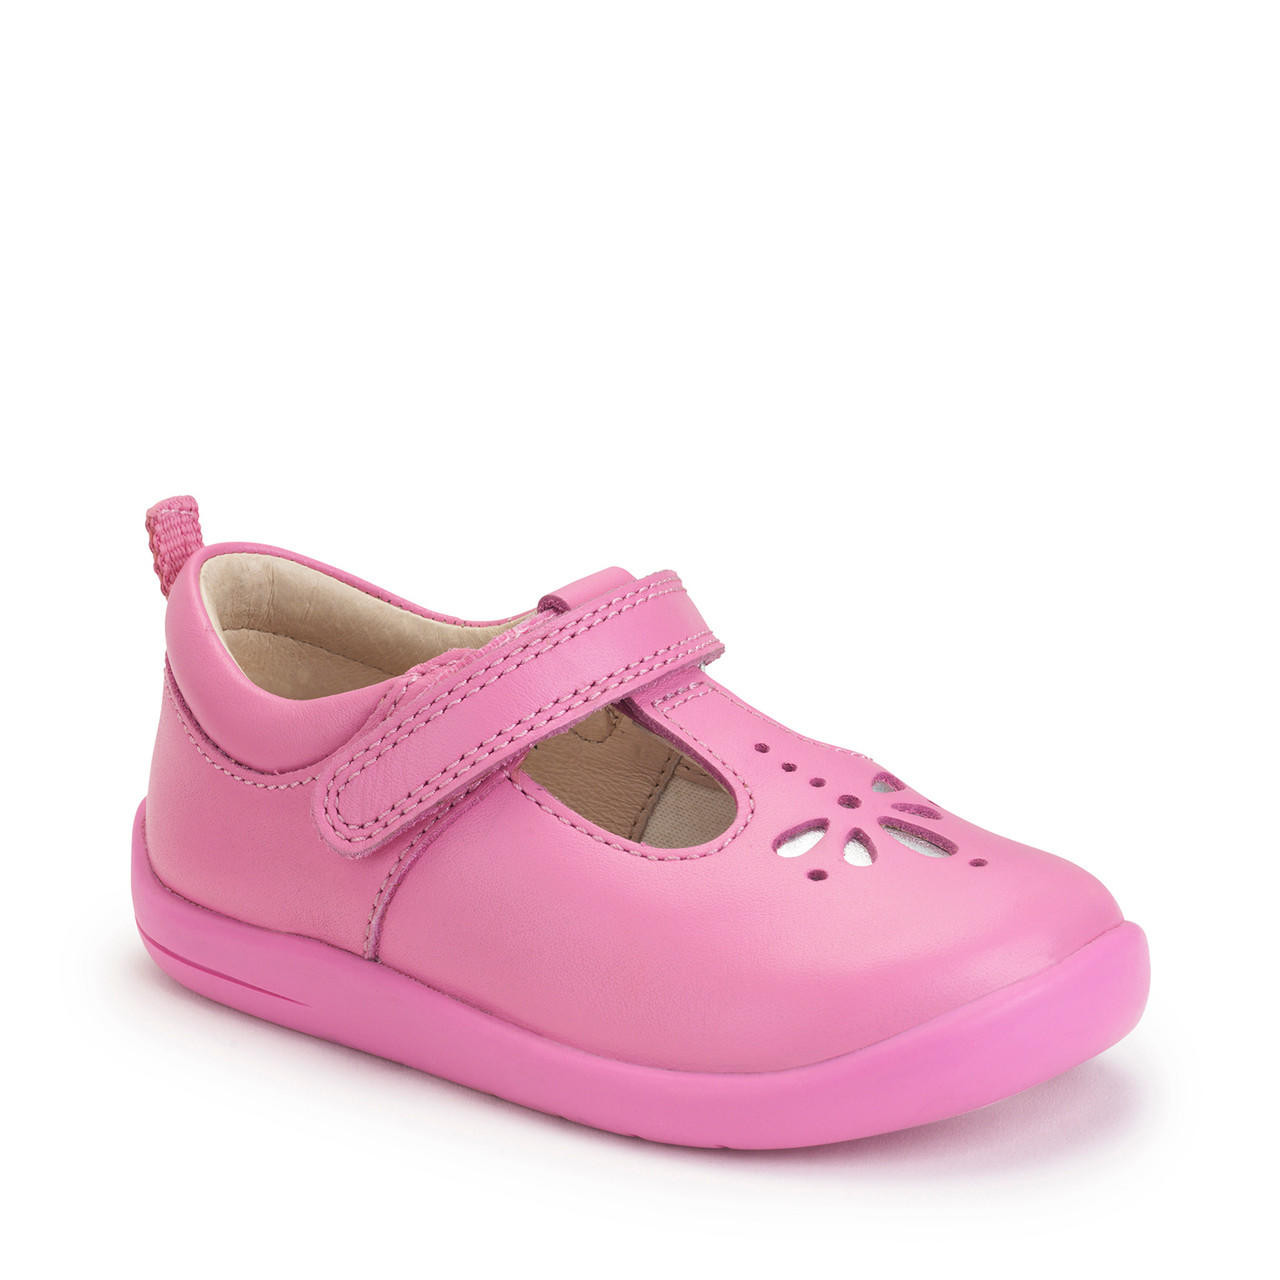 Puzzle, Rose pink leather girls rip-tape first walking shoes